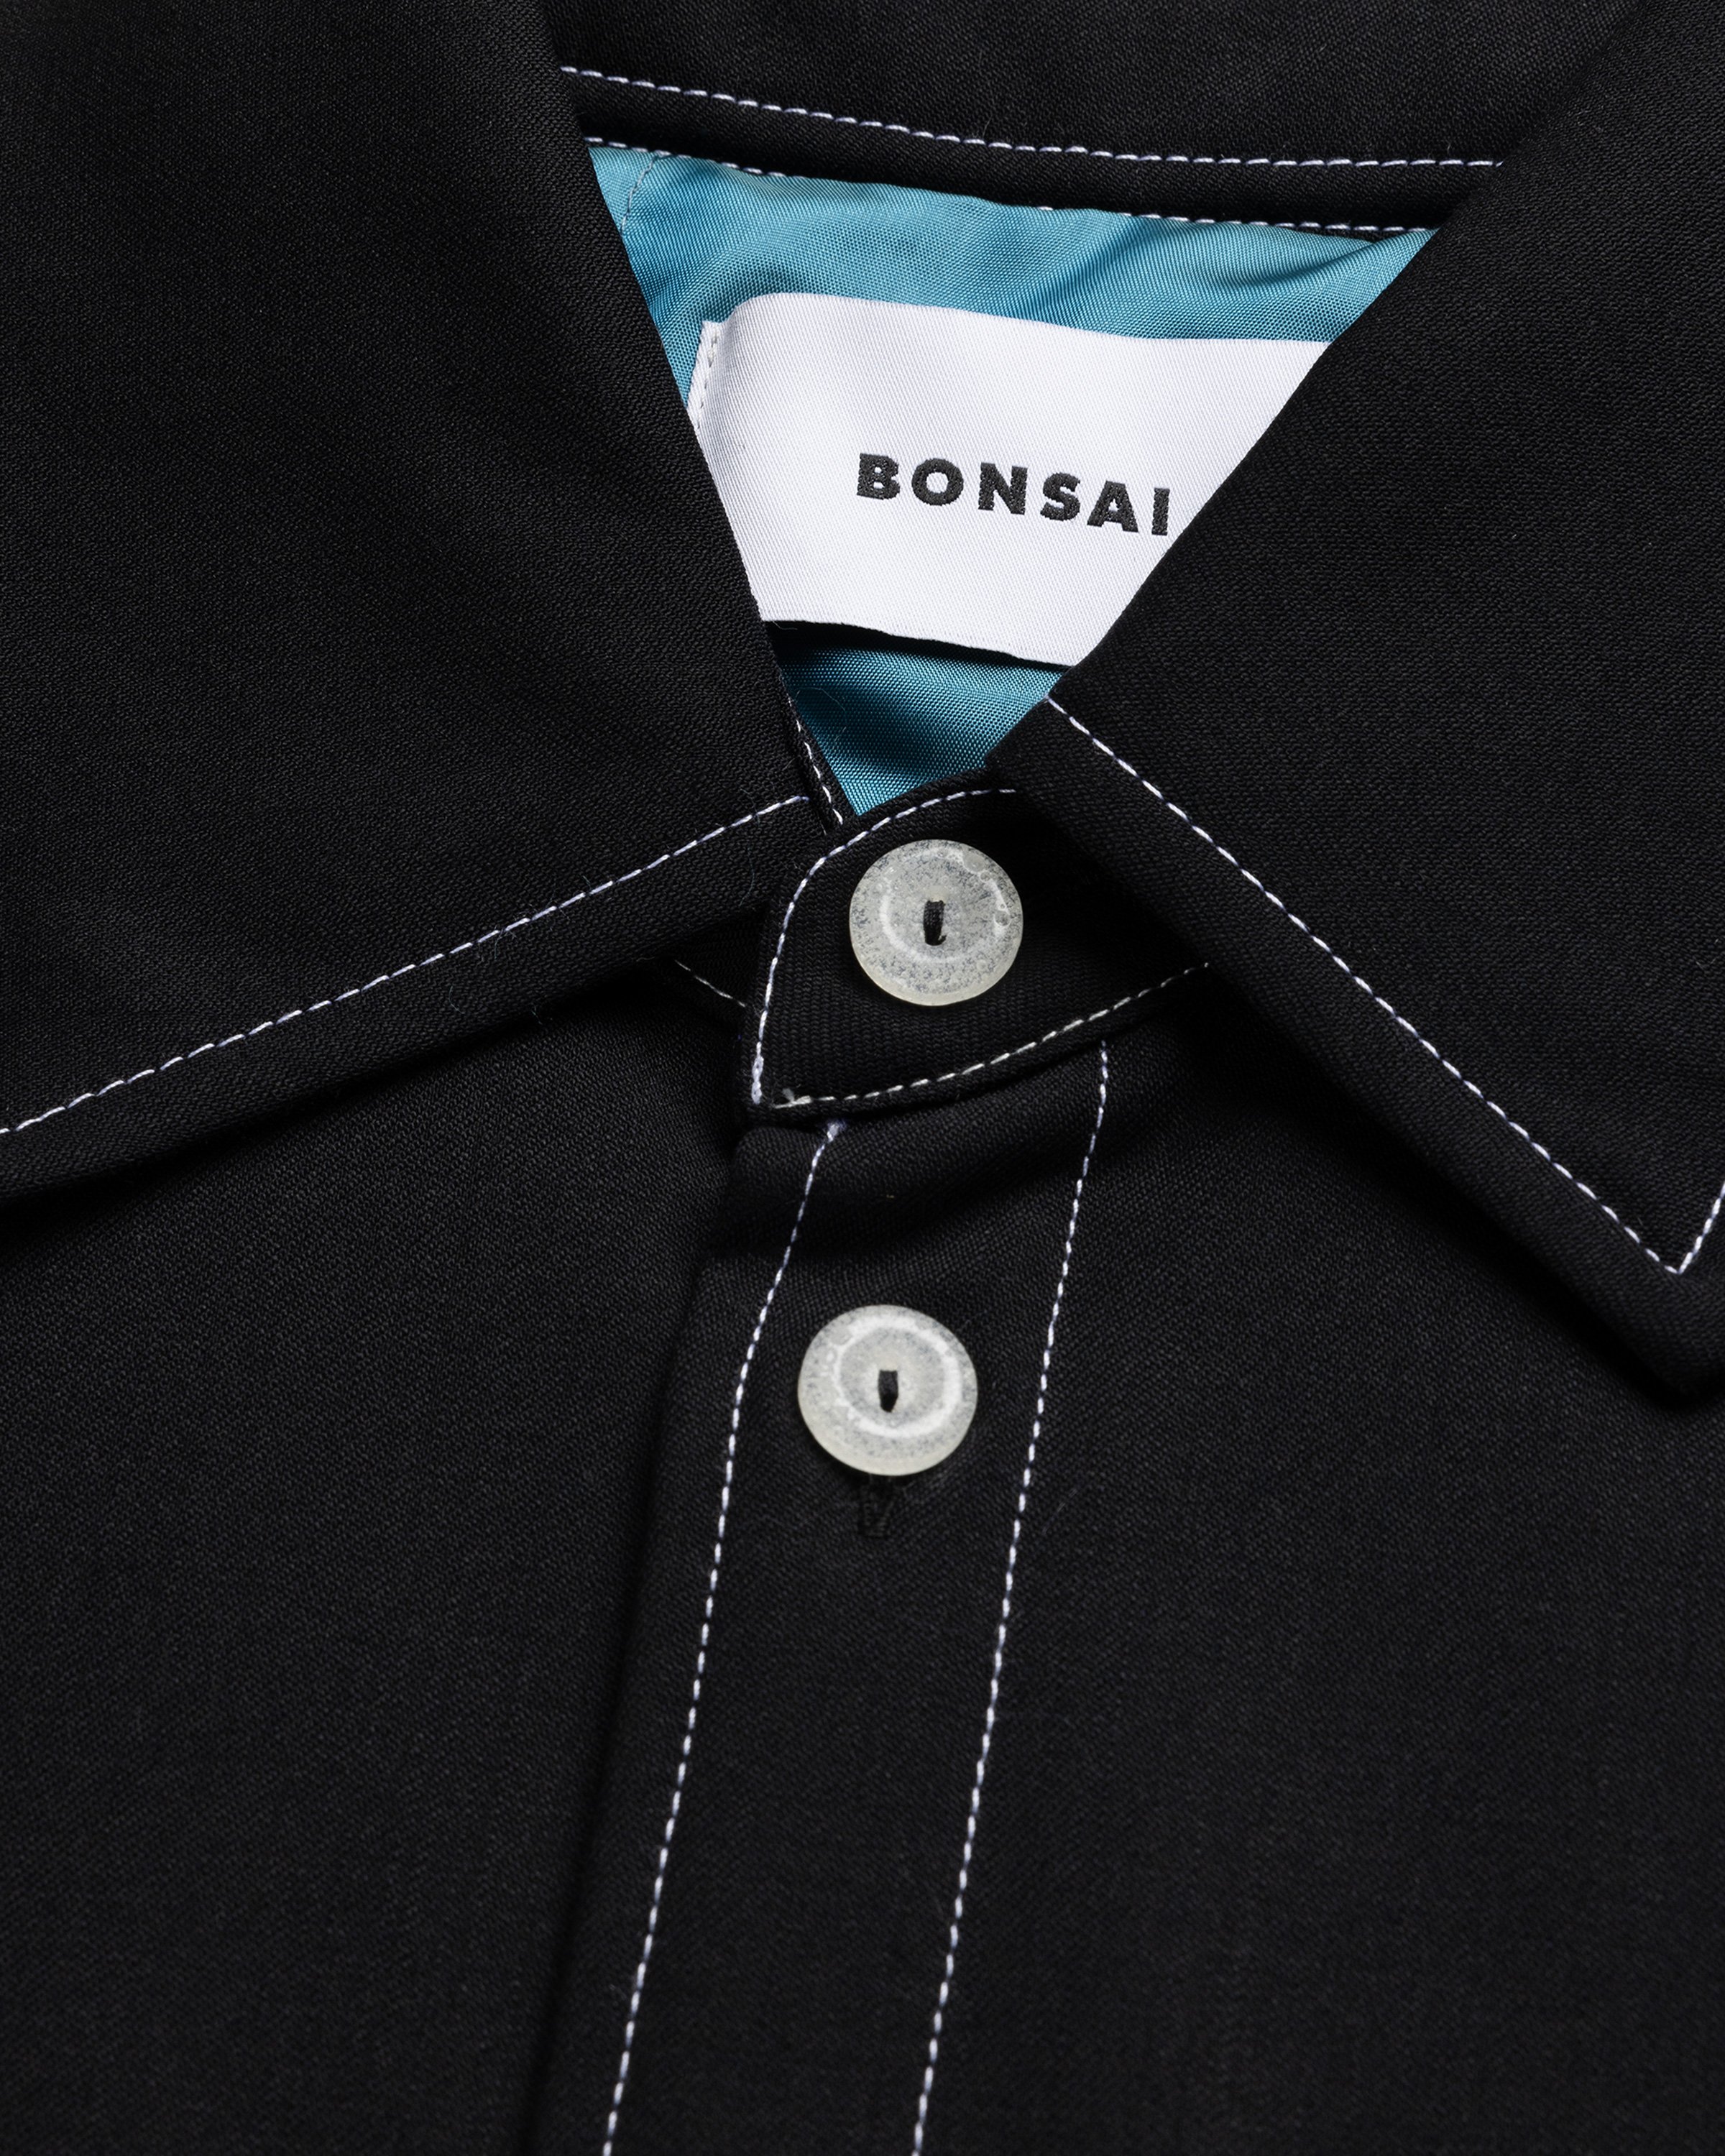 Bonsai - BUTTON DOWN OVERSHIRT, CONTRAST ICE TOPSTITCHING WITH BONSAI UNDERWATER LABEL Blue - Clothing - Blue - Image 5